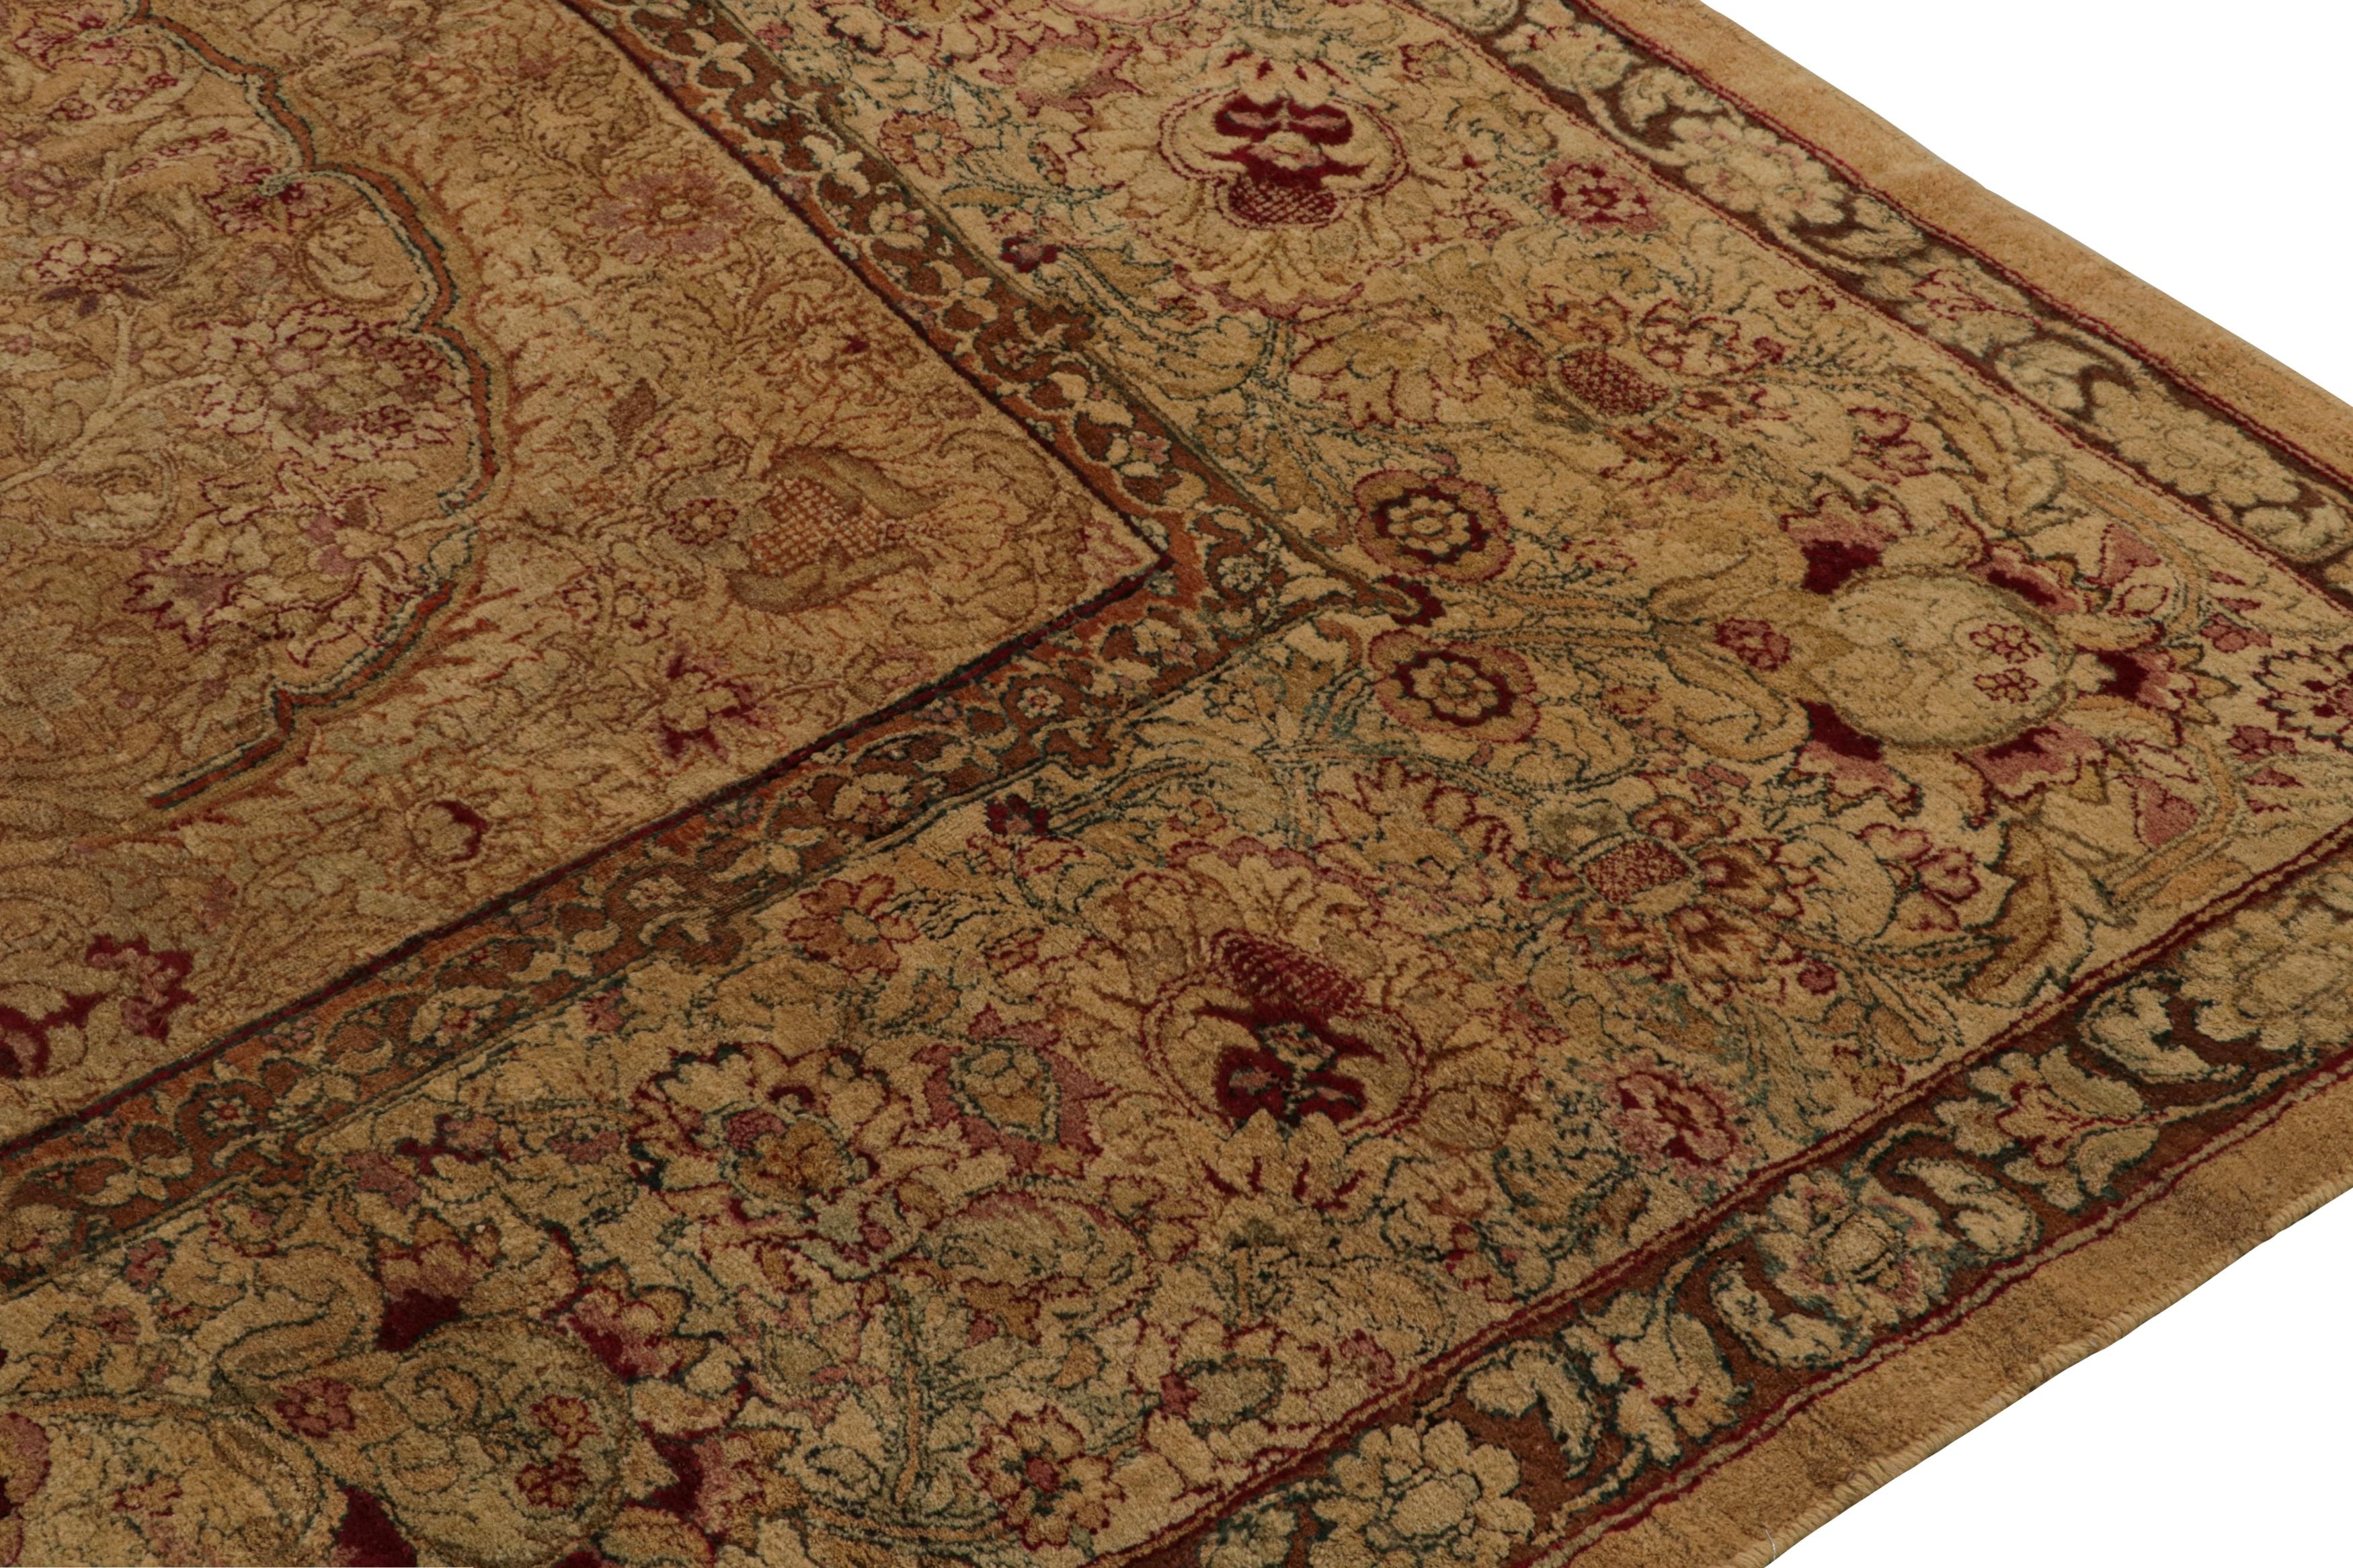 Antique Agra Rug in Gold and Brown with Floral Patterns In Good Condition For Sale In Long Island City, NY